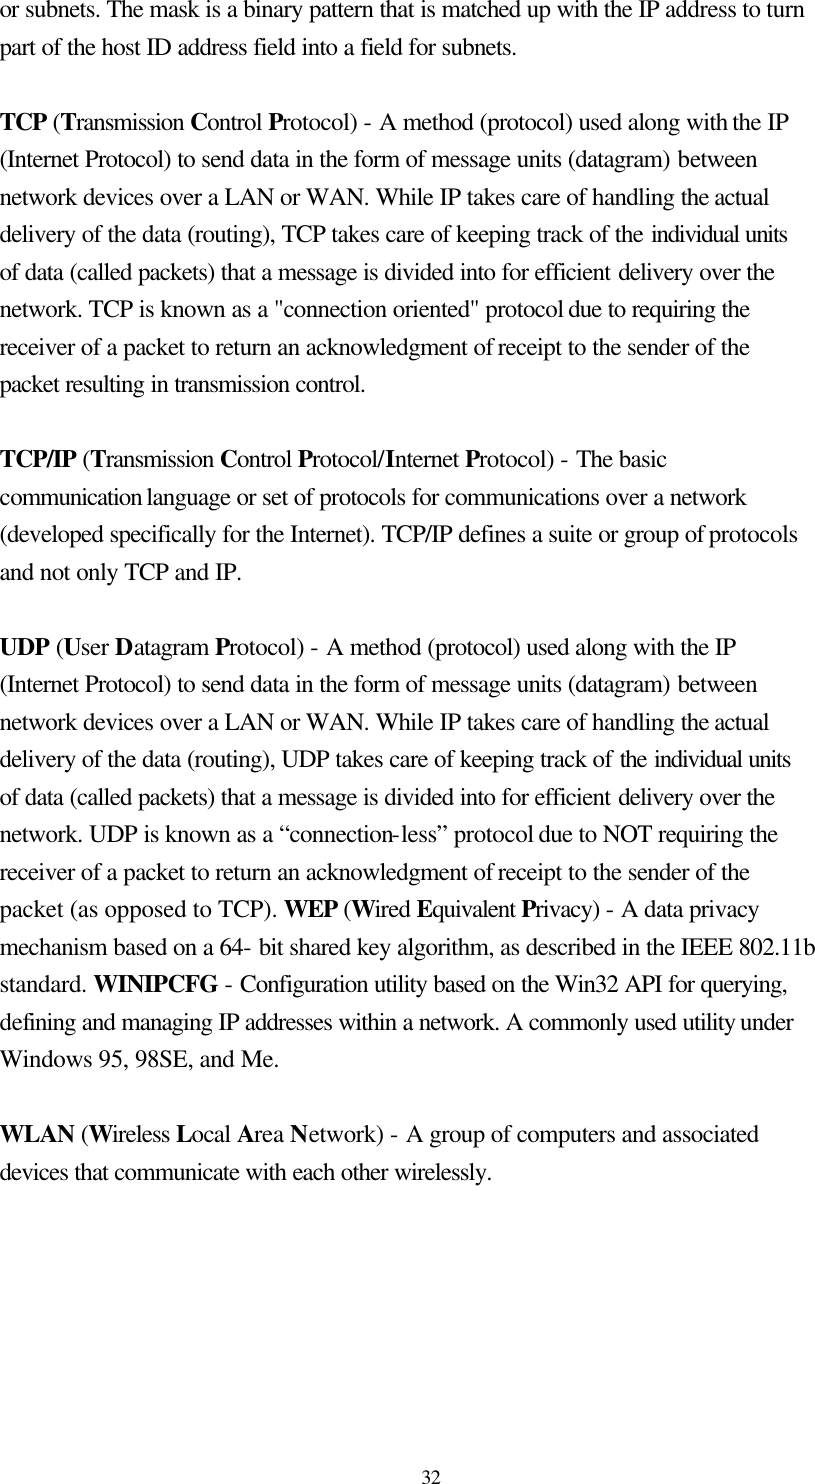  32 or subnets. The mask is a binary pattern that is matched up with the IP address to turn part of the host ID address field into a field for subnets.    TCP (Transmission Control Protocol) - A method (protocol) used along with the IP (Internet Protocol) to send data in the form of message units (datagram) between network devices over a LAN or WAN. While IP takes care of handling the actual delivery of the data (routing), TCP takes care of keeping track of the individual units of data (called packets) that a message is divided into for efficient delivery over the network. TCP is known as a &quot;connection oriented&quot; protocol due to requiring the receiver of a packet to return an acknowledgment of receipt to the sender of the packet resulting in transmission control.  TCP/IP (Transmission Control Protocol/Internet Protocol) - The basic communication language or set of protocols for communications over a network (developed specifically for the Internet). TCP/IP defines a suite or group of protocols and not only TCP and IP.  UDP (User Datagram Protocol) - A method (protocol) used along with the IP (Internet Protocol) to send data in the form of message units (datagram) between network devices over a LAN or WAN. While IP takes care of handling the actual delivery of the data (routing), UDP takes care of keeping track of the individual units of data (called packets) that a message is divided into for efficient delivery over the network. UDP is known as a “connection-less” protocol due to NOT requiring the receiver of a packet to return an acknowledgment of receipt to the sender of the packet (as opposed to TCP). WEP (Wired Equivalent Privacy) - A data privacy mechanism based on a 64- bit shared key algorithm, as described in the IEEE 802.11b standard. WINIPCFG - Configuration utility based on the Win32 API for querying, defining and managing IP addresses within a network. A commonly used utility under Windows 95, 98SE, and Me.  WLAN (Wireless Local Area Network) - A group of computers and associated devices that communicate with each other wirelessly.  